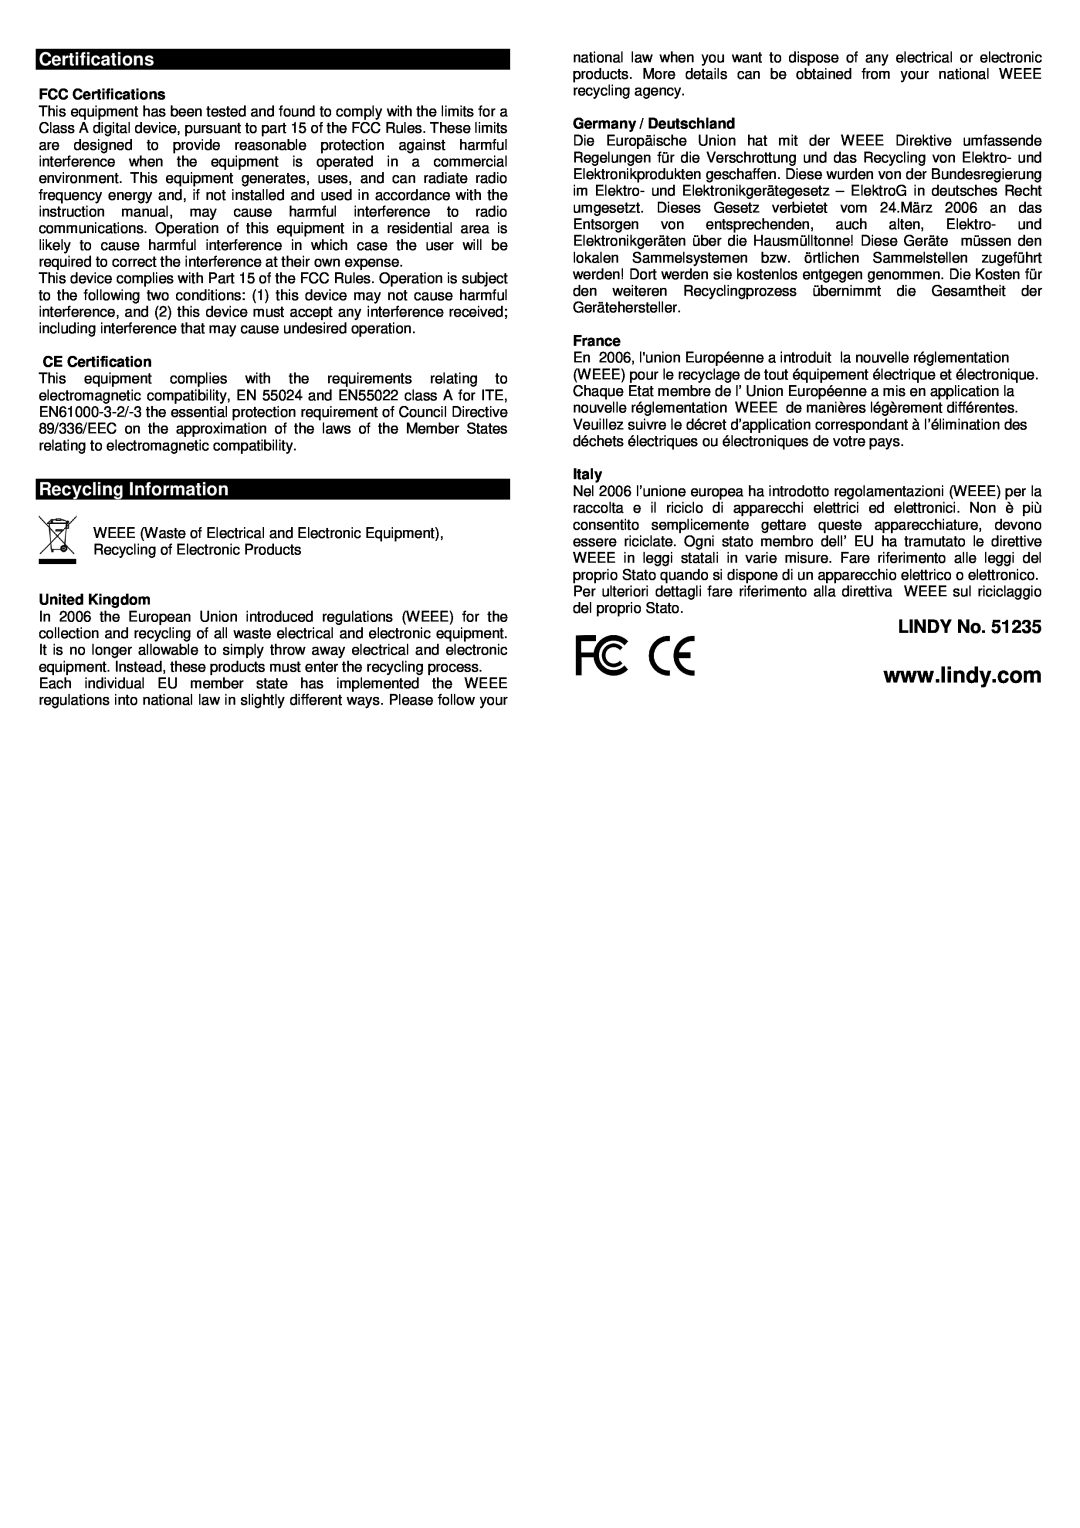 Lindy PCI 1S (16C950 128 FIFO) Recycling Information, FCC Certifications, CE Certification, United Kingdom, France 